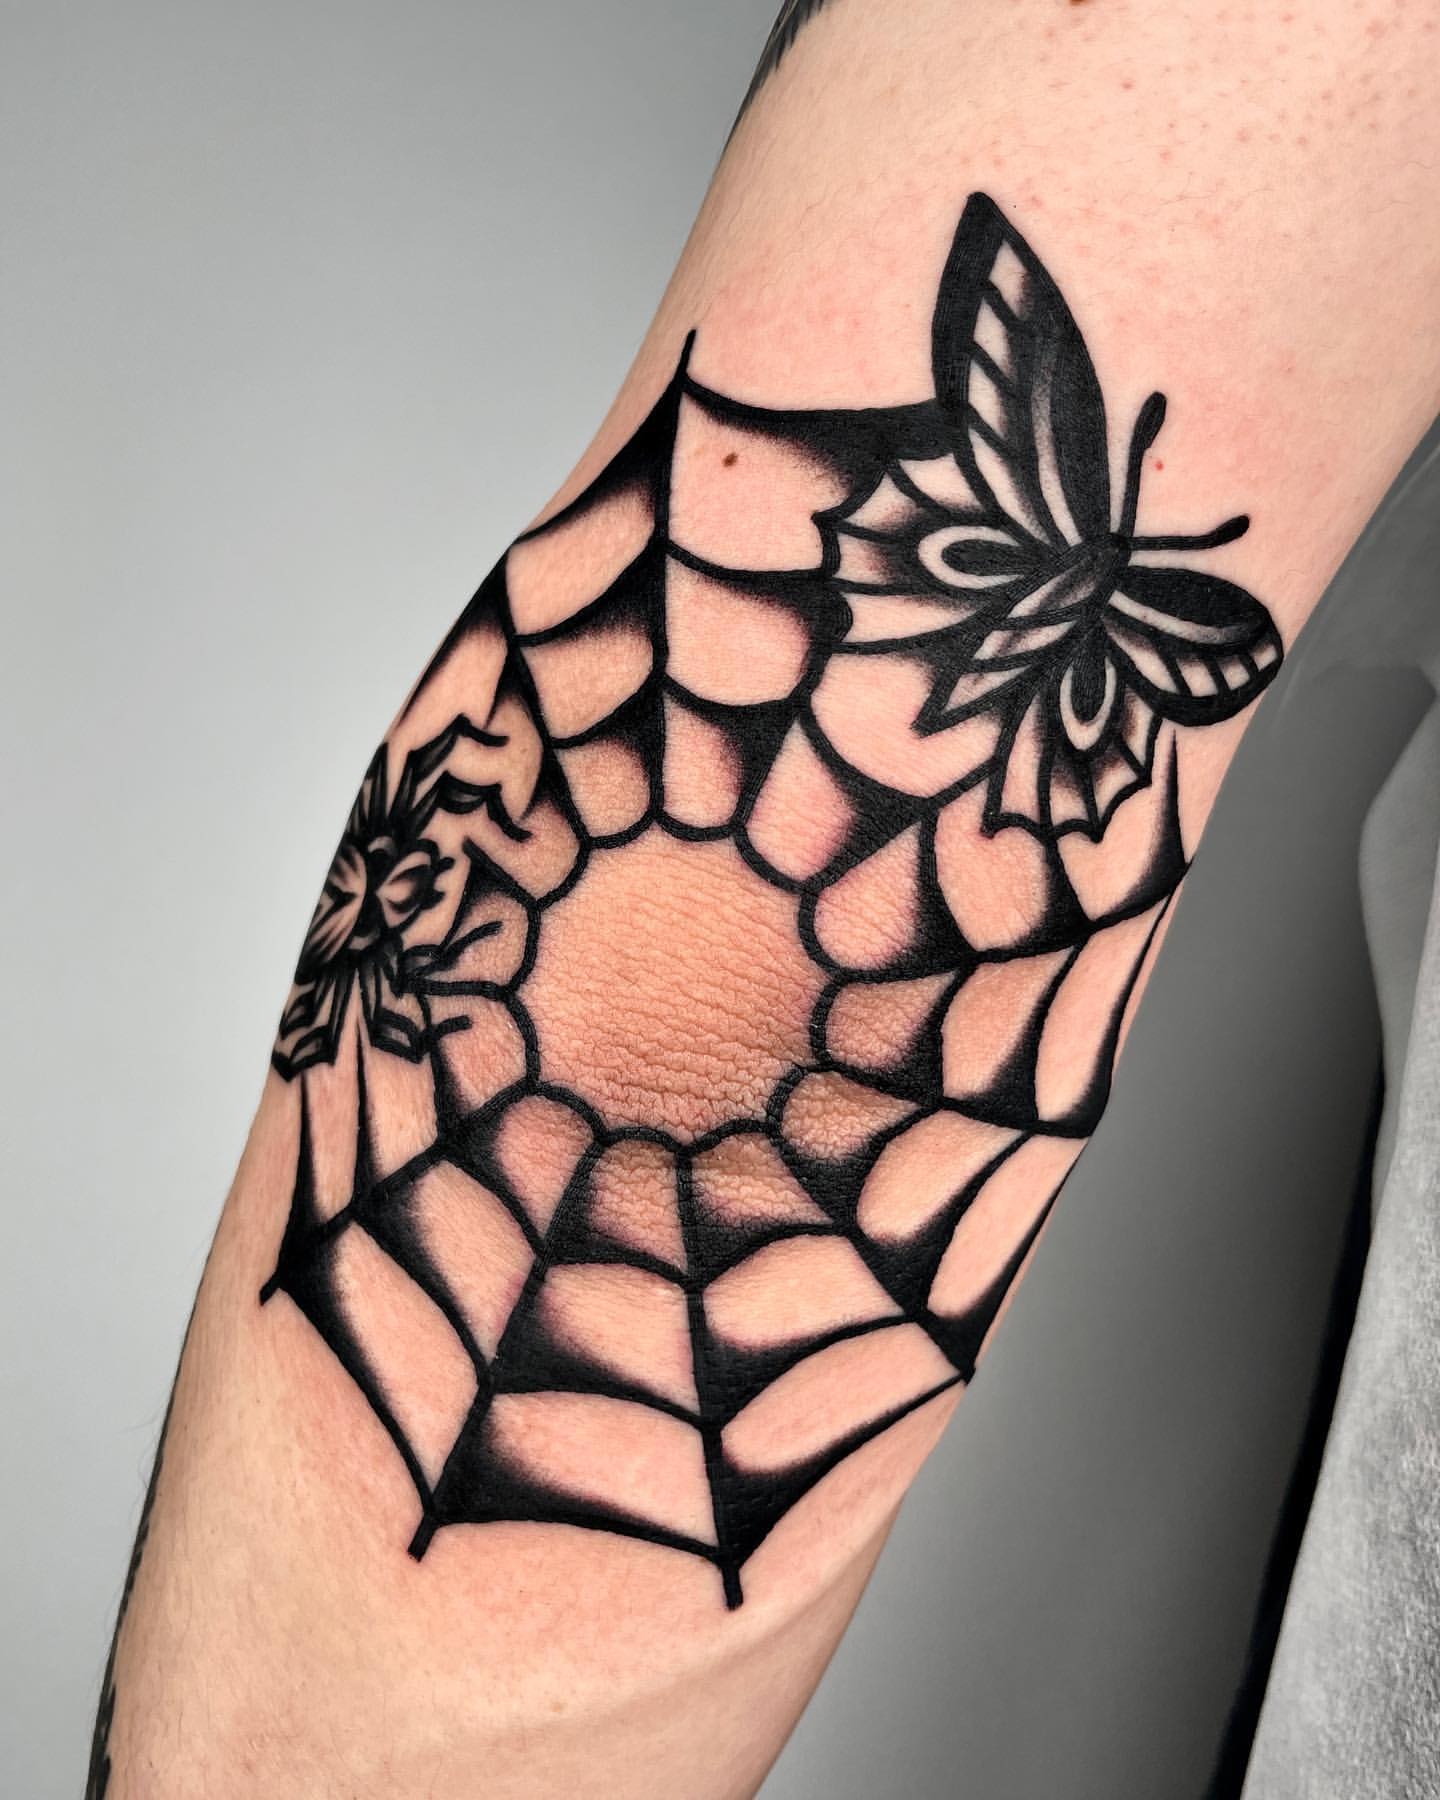 Having trouble deciding on an elbow tattoo besides a spider web for an  upcoming appointment, thoughts? : r/traditionaltattoos